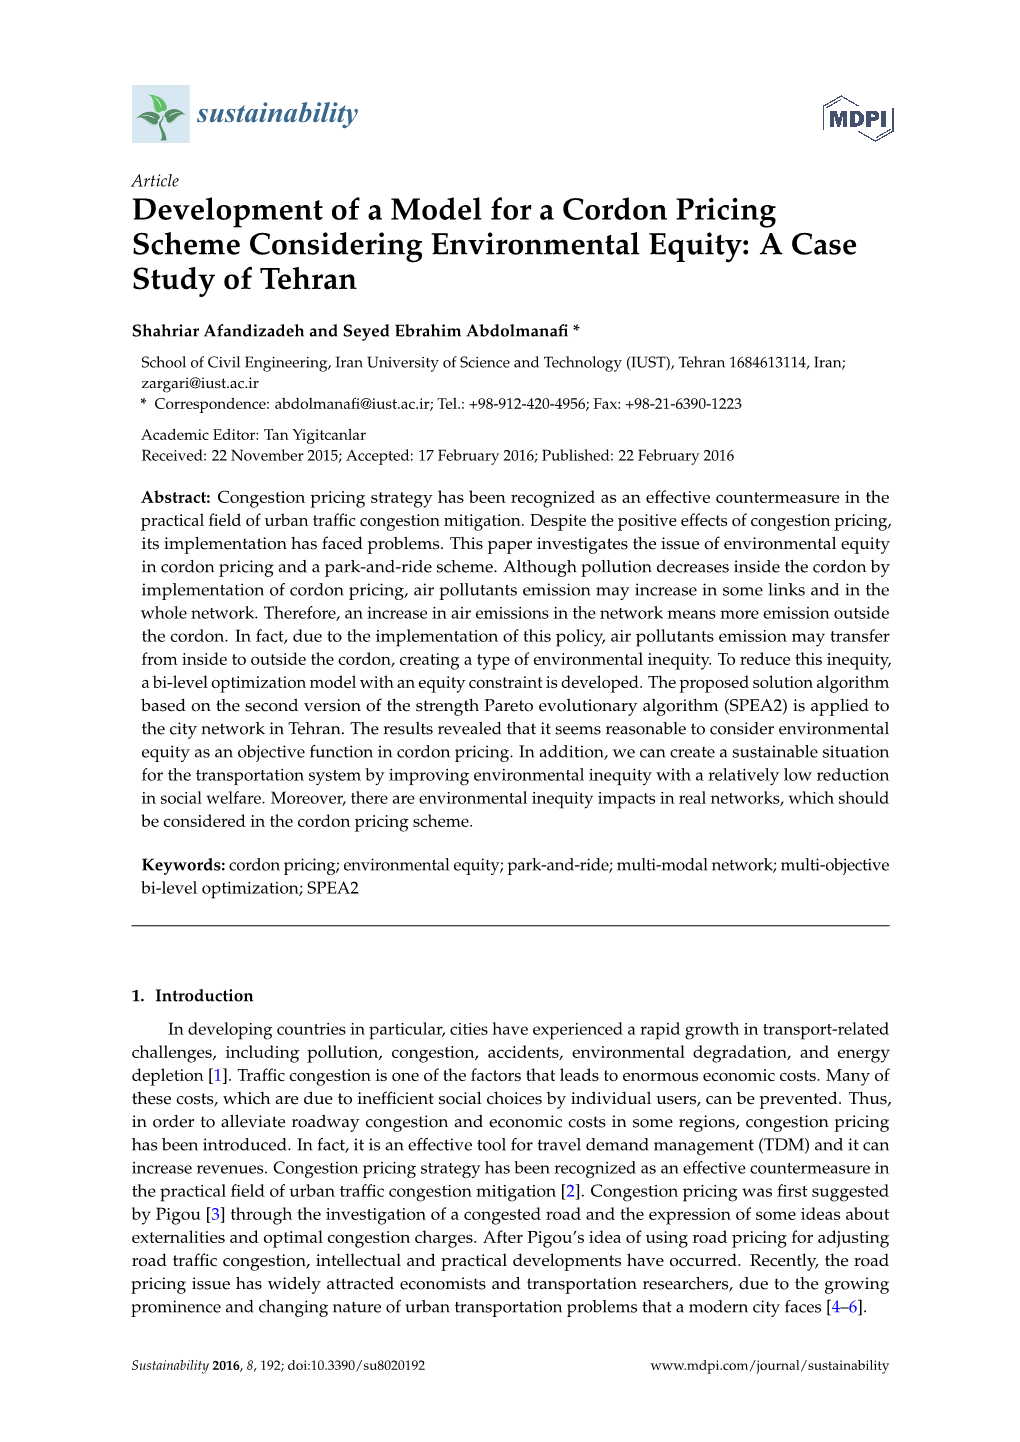 Development of a Model for a Cordon Pricing Scheme Considering Environmental Equity: a Case Study of Tehran